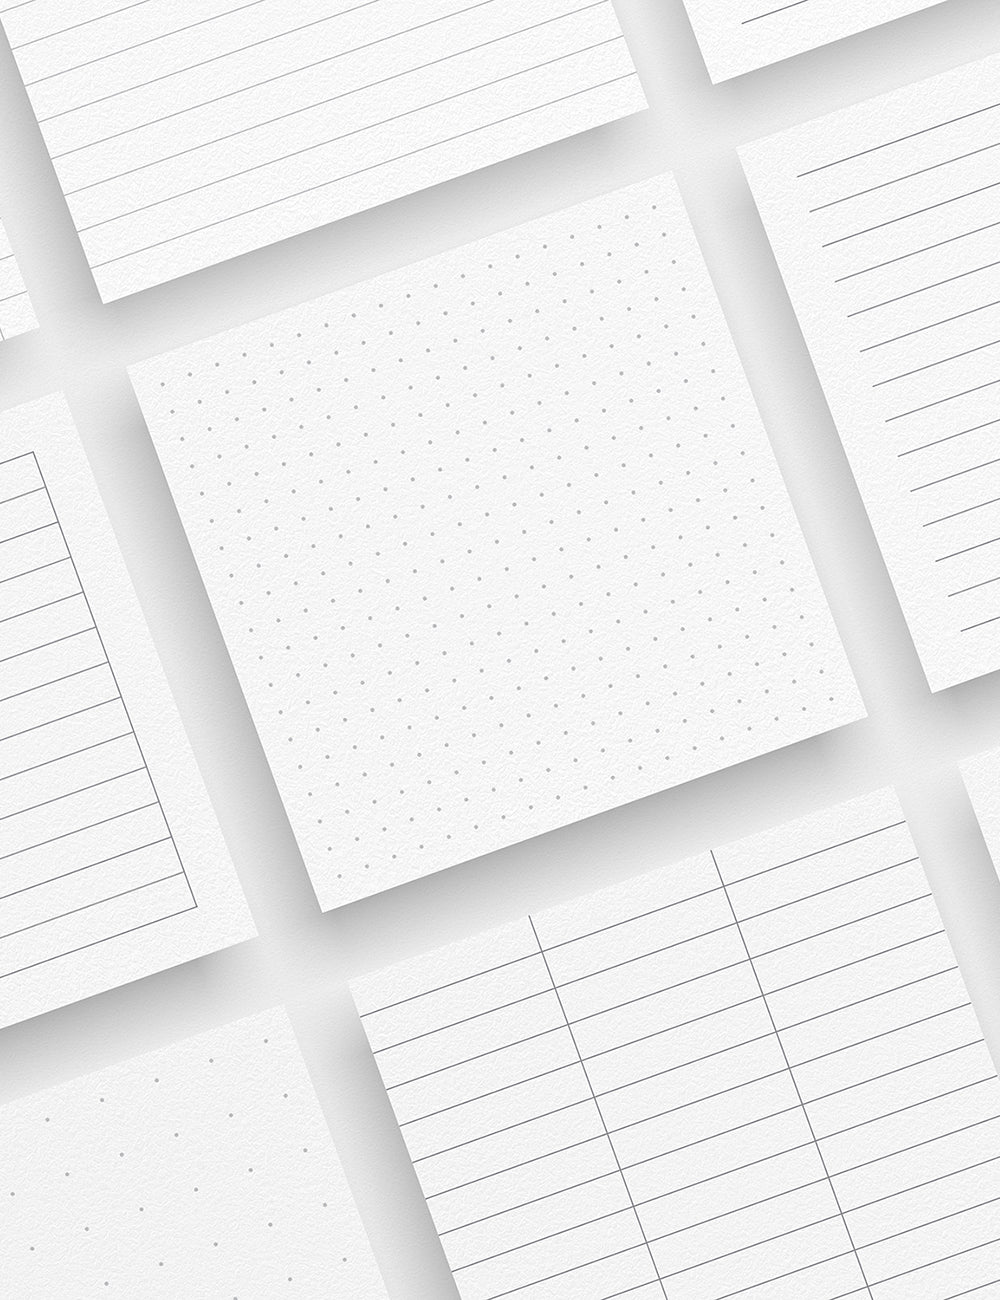 Printable Notes and Memo Cards | 3x3 | Printable Journal & Planner Cards | Notes | Lined, Dotted, Grid | Minimal Aesthetic | Clean Design | PAPER MOON Art & Design